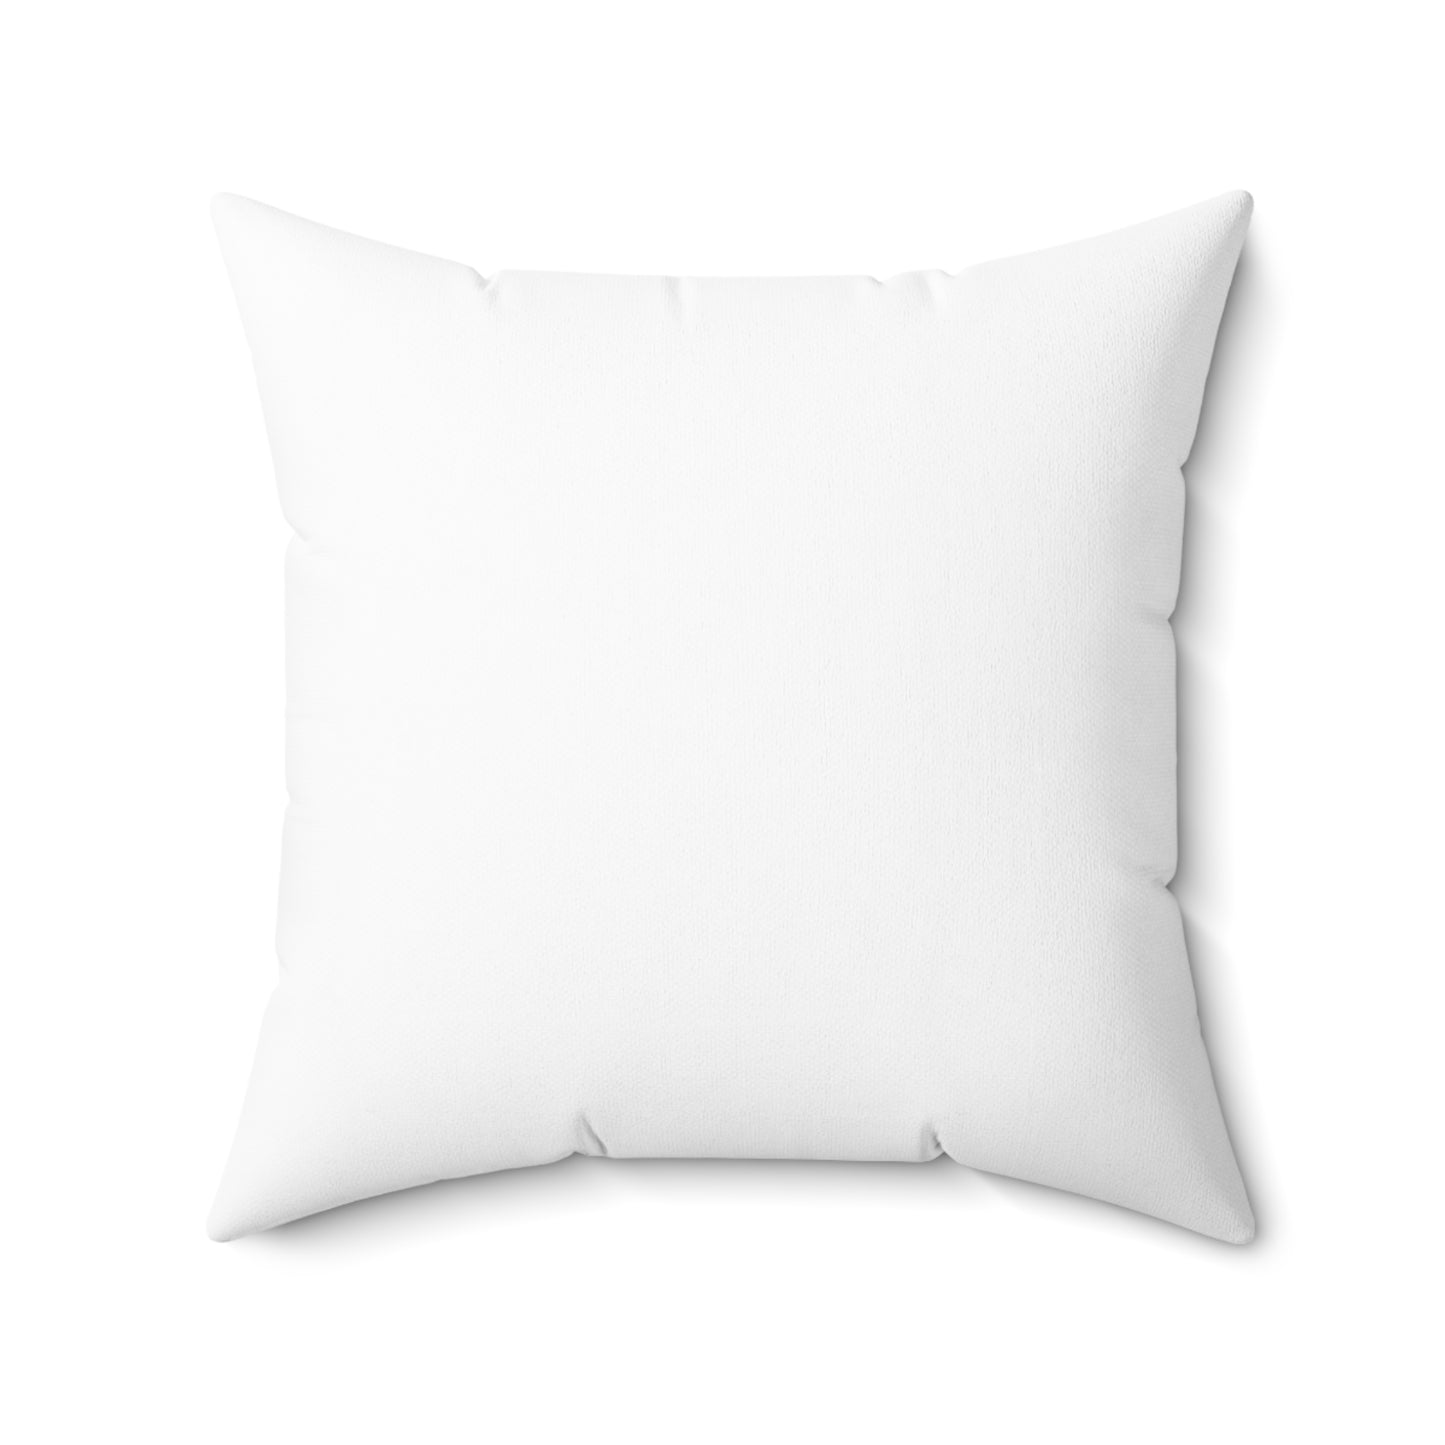 Wicked Wheels Throw Pillow